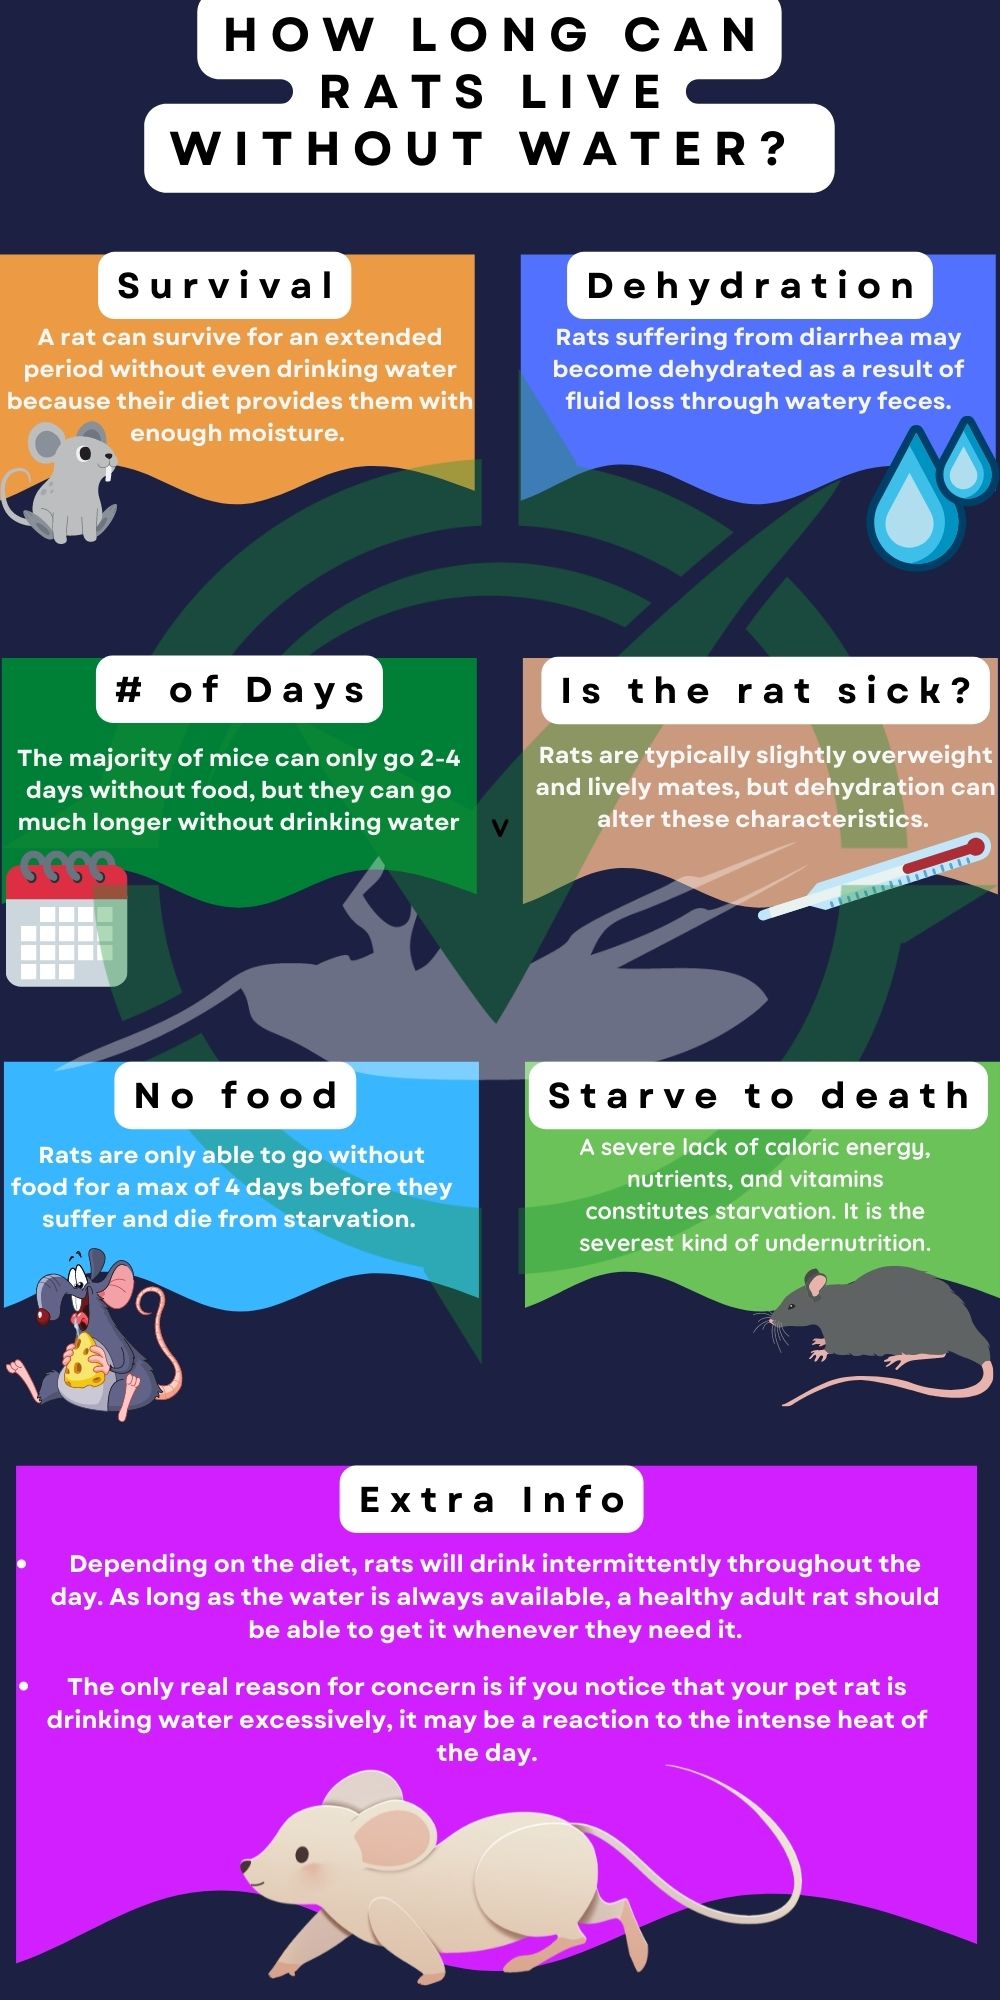 How Long Can Rats Live Without Water